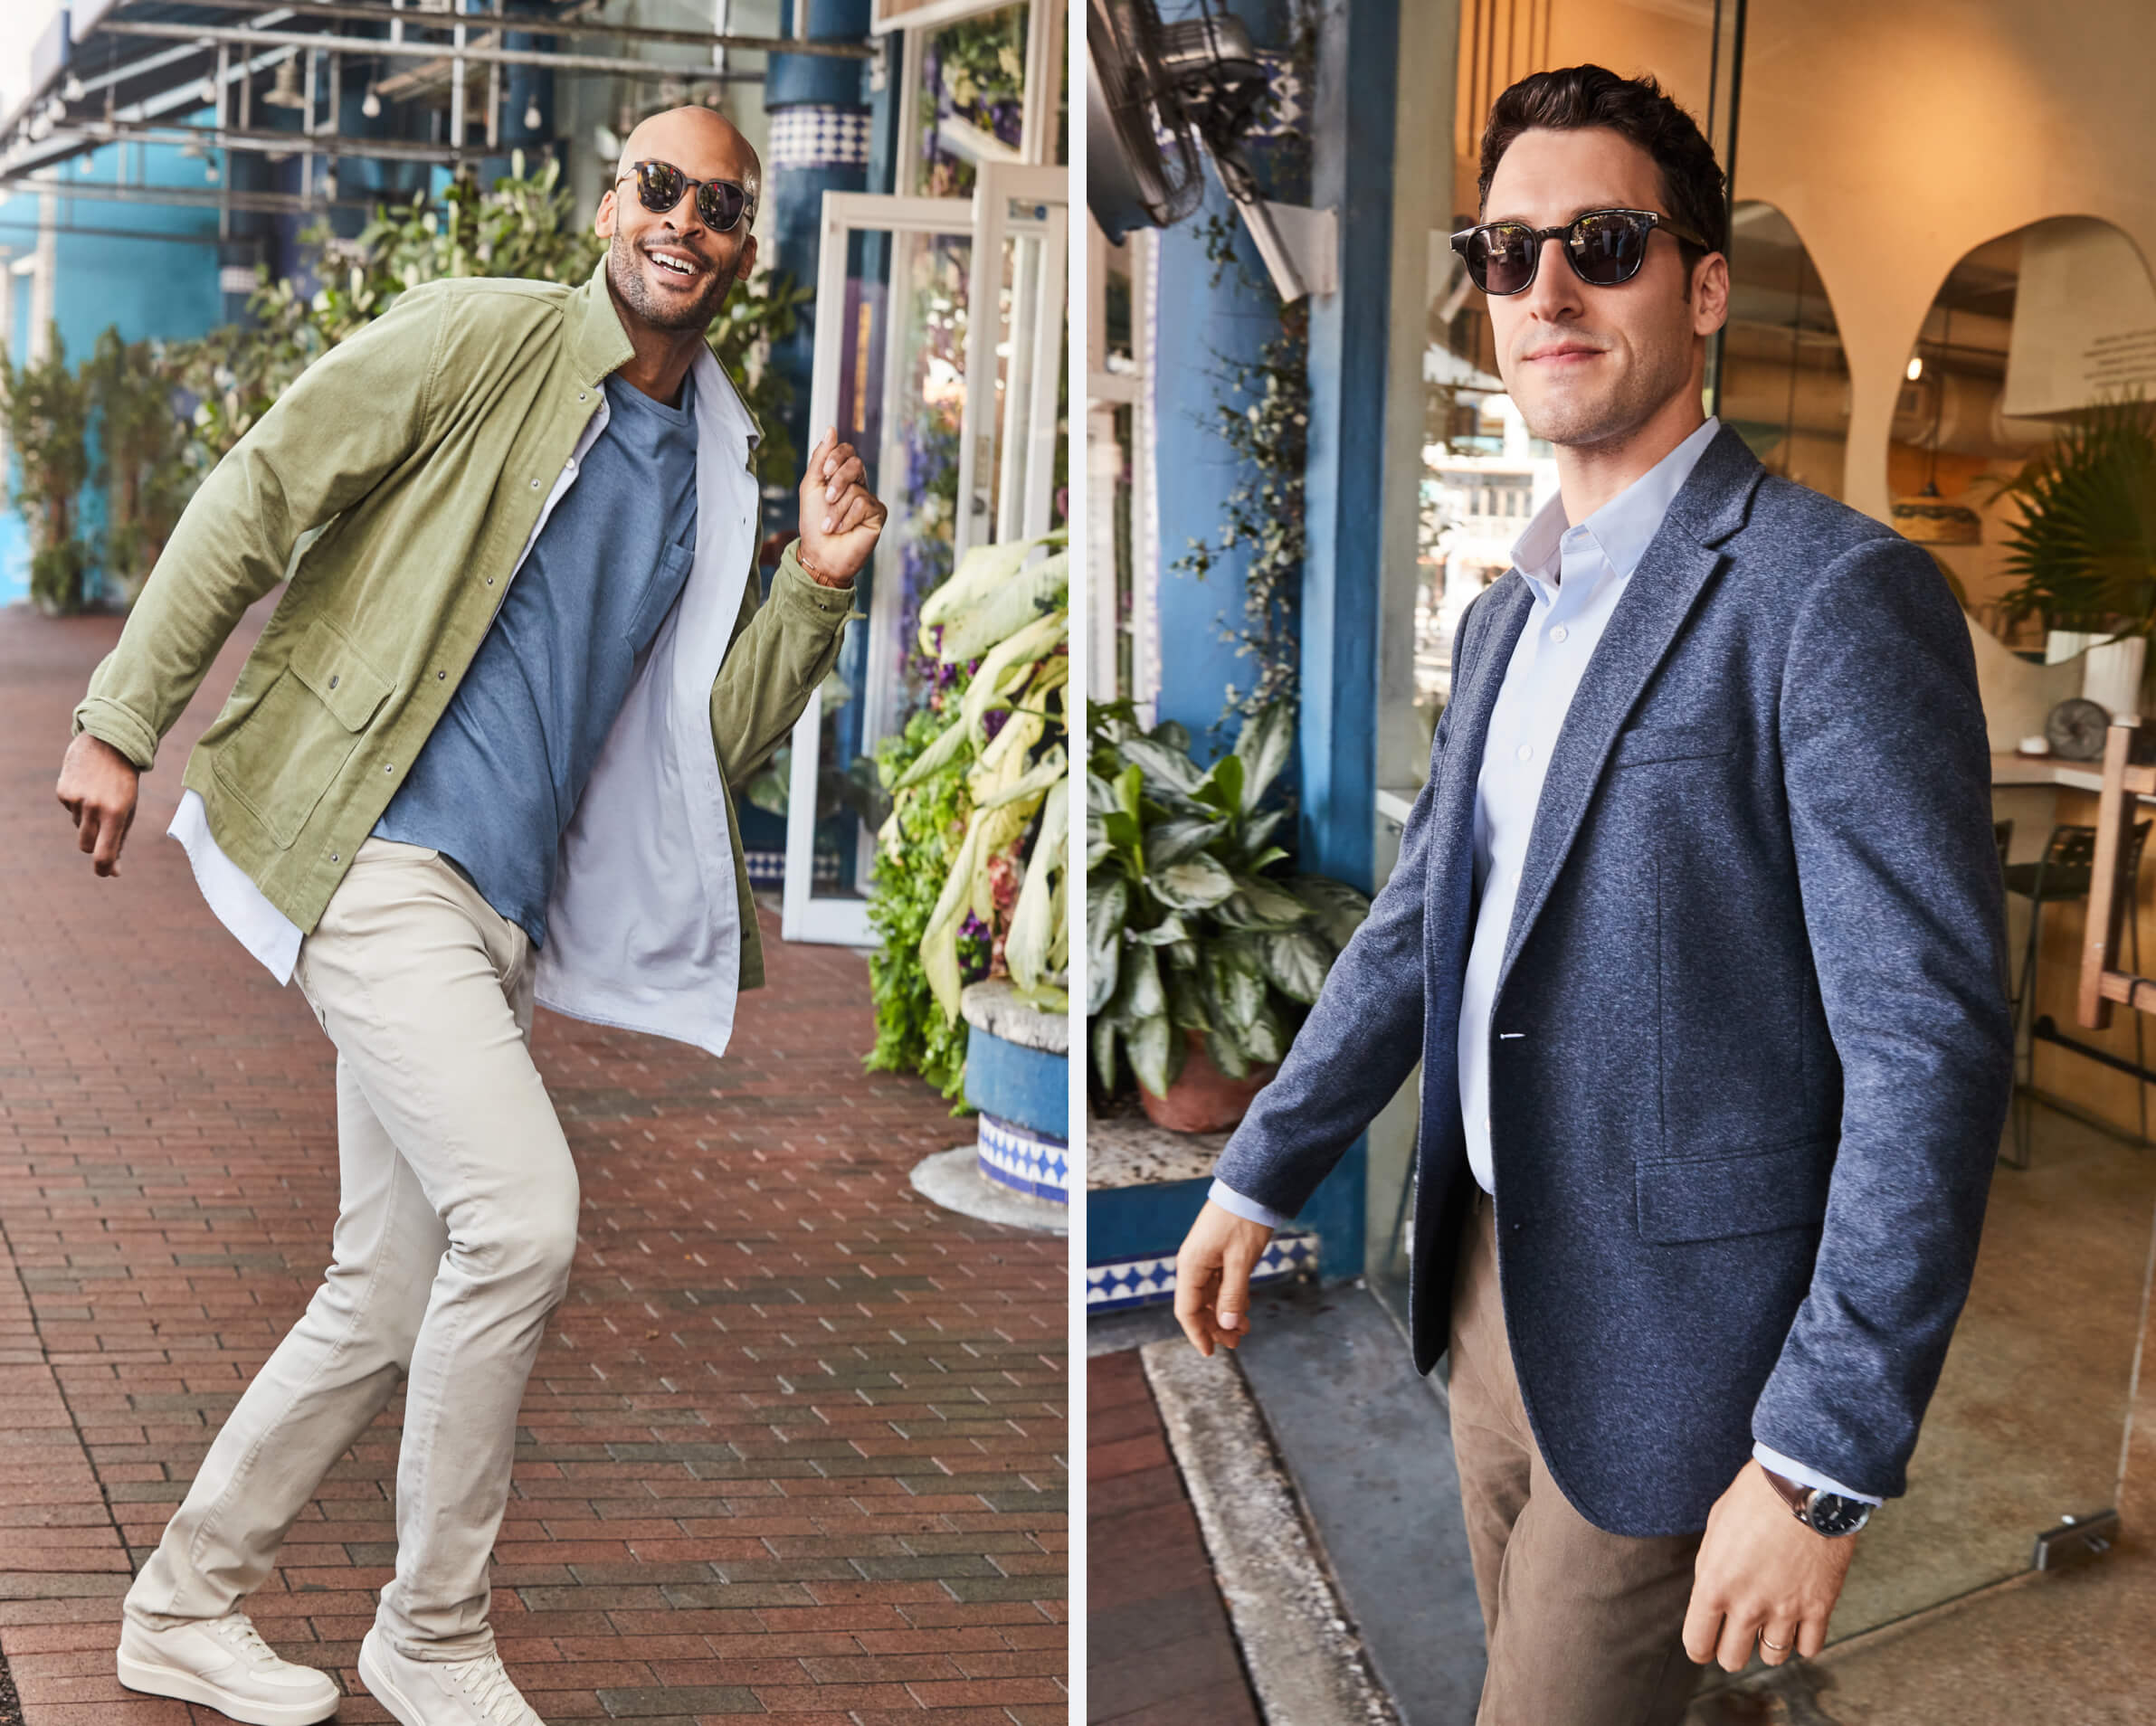 On the left: a man wearing white chinos, white sneakers, and a matcha green jacket over an open white button-down shirt and a periwinkle blue t-shirt. On the right, a man in tan slacks, light blue dress shirt, and navy blue blazer.